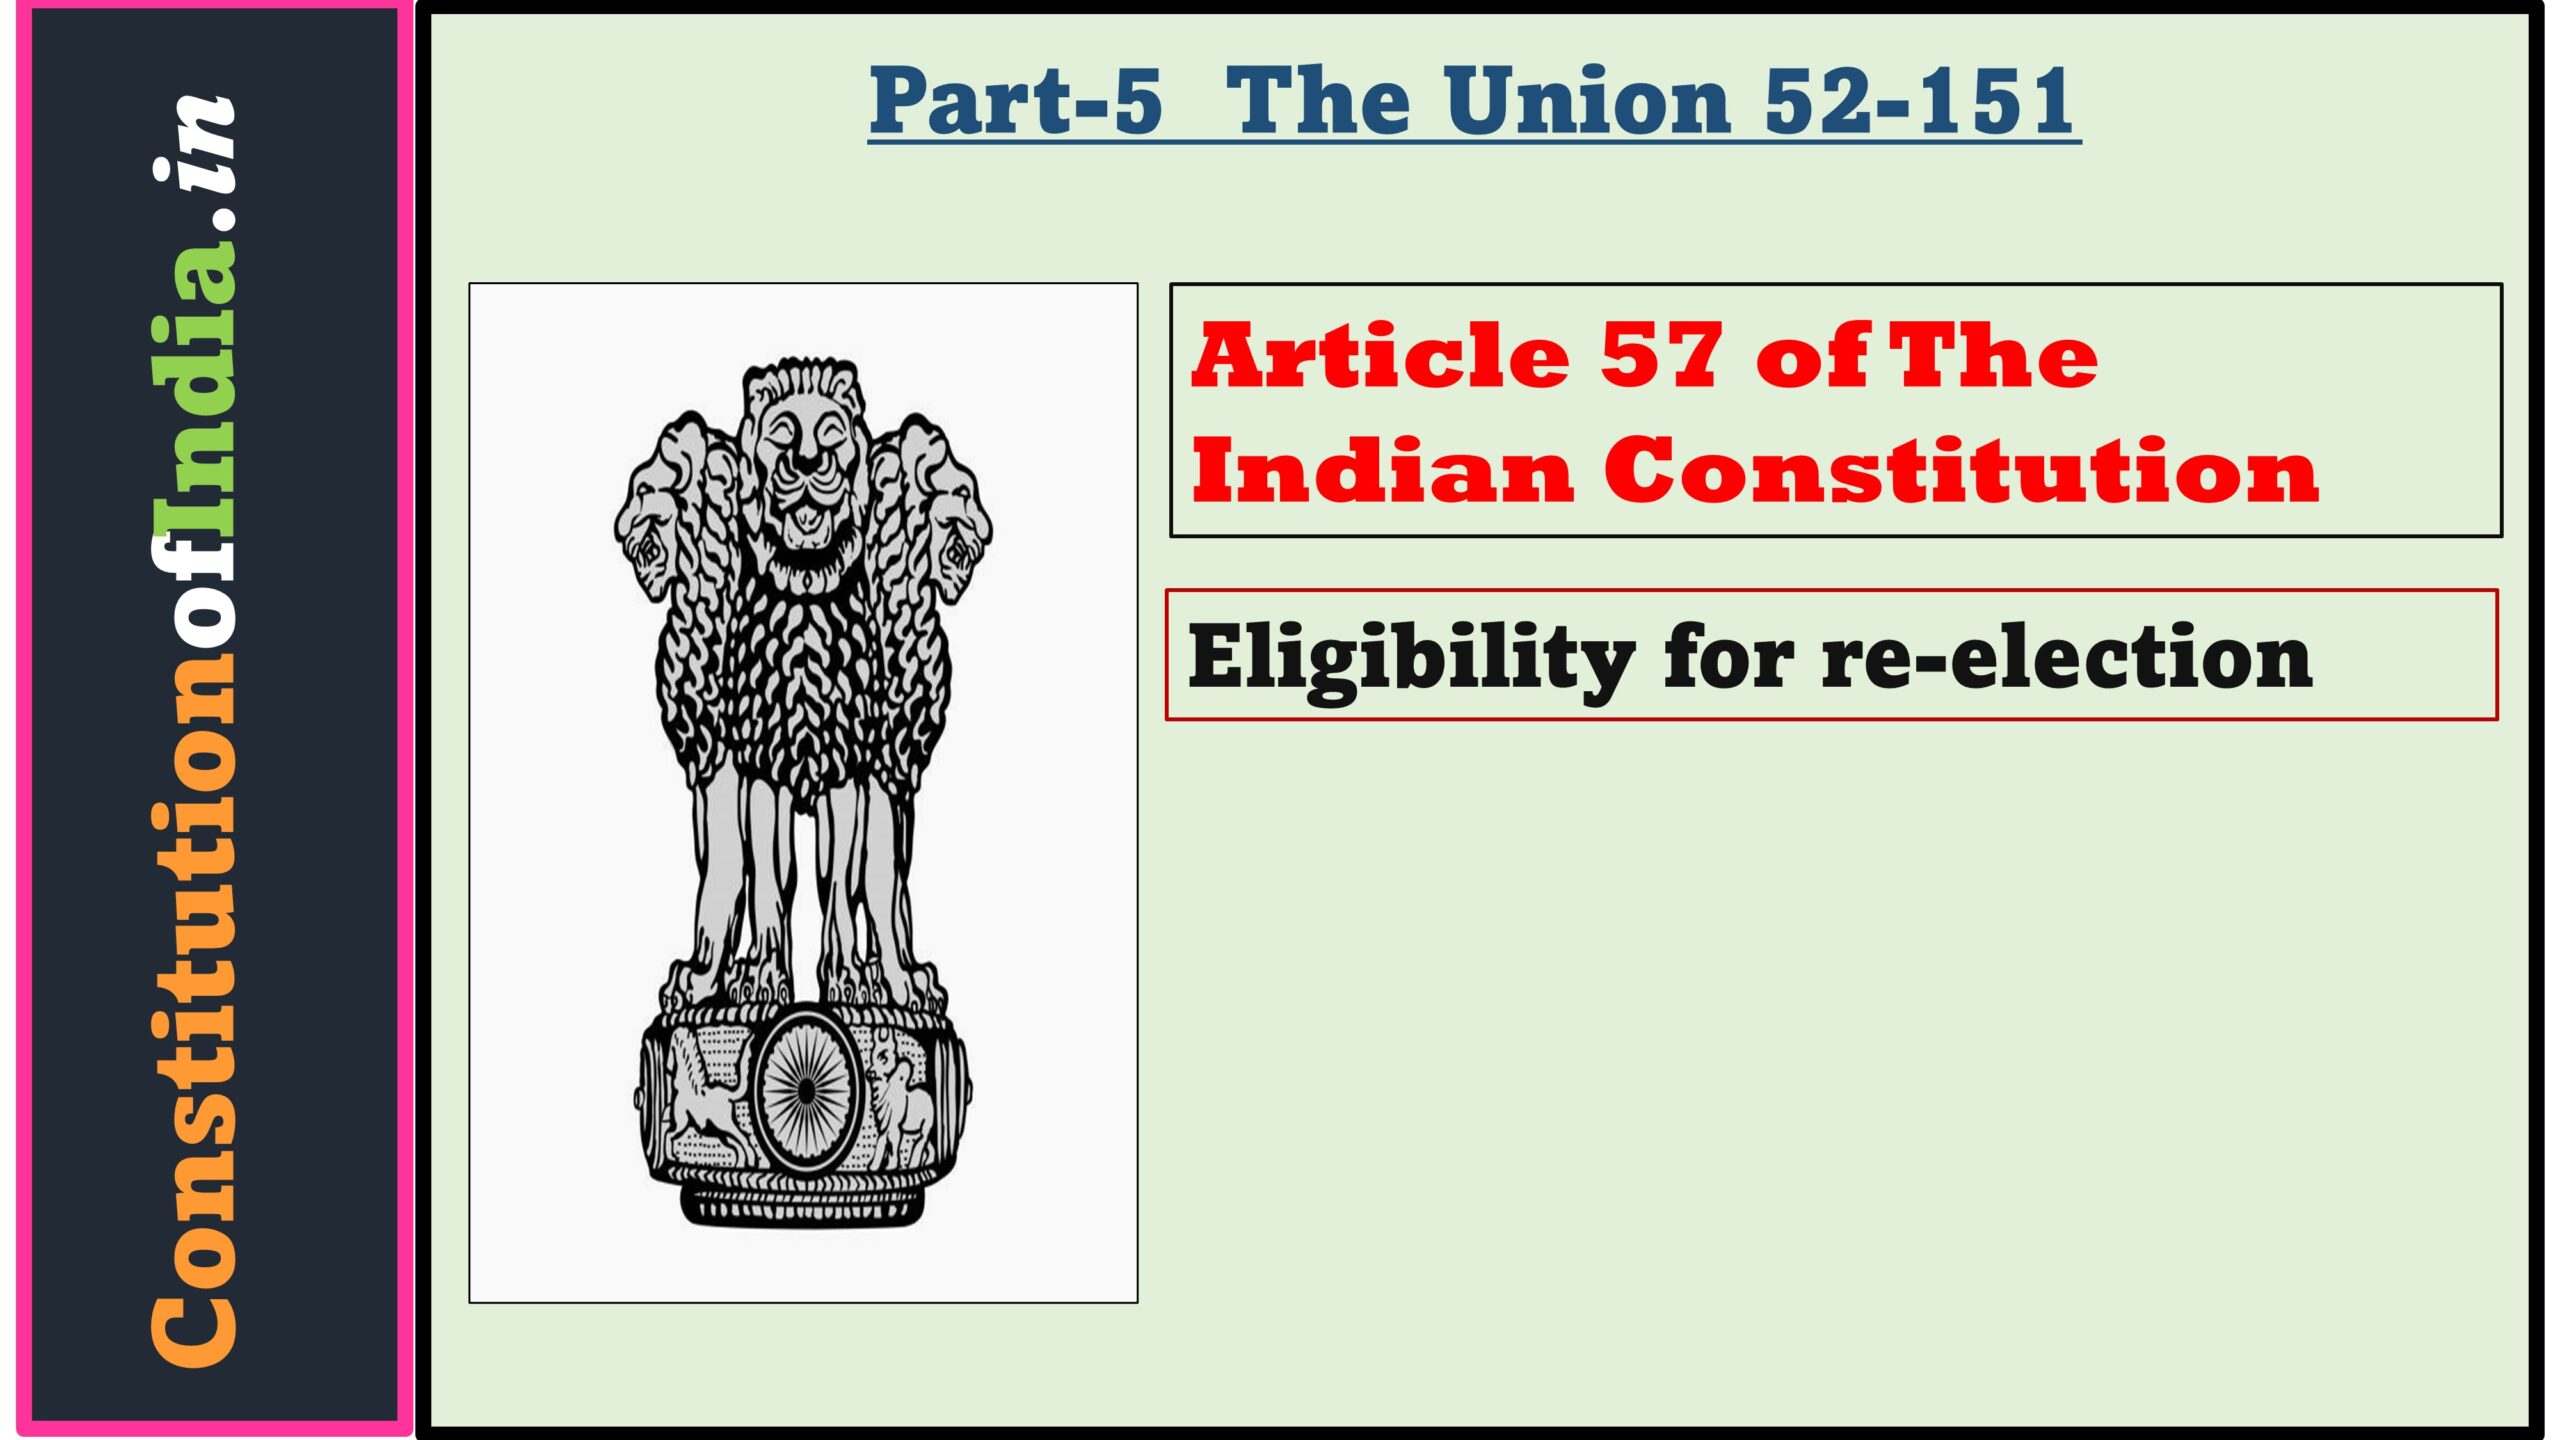 Article 57 of Indian Constitution